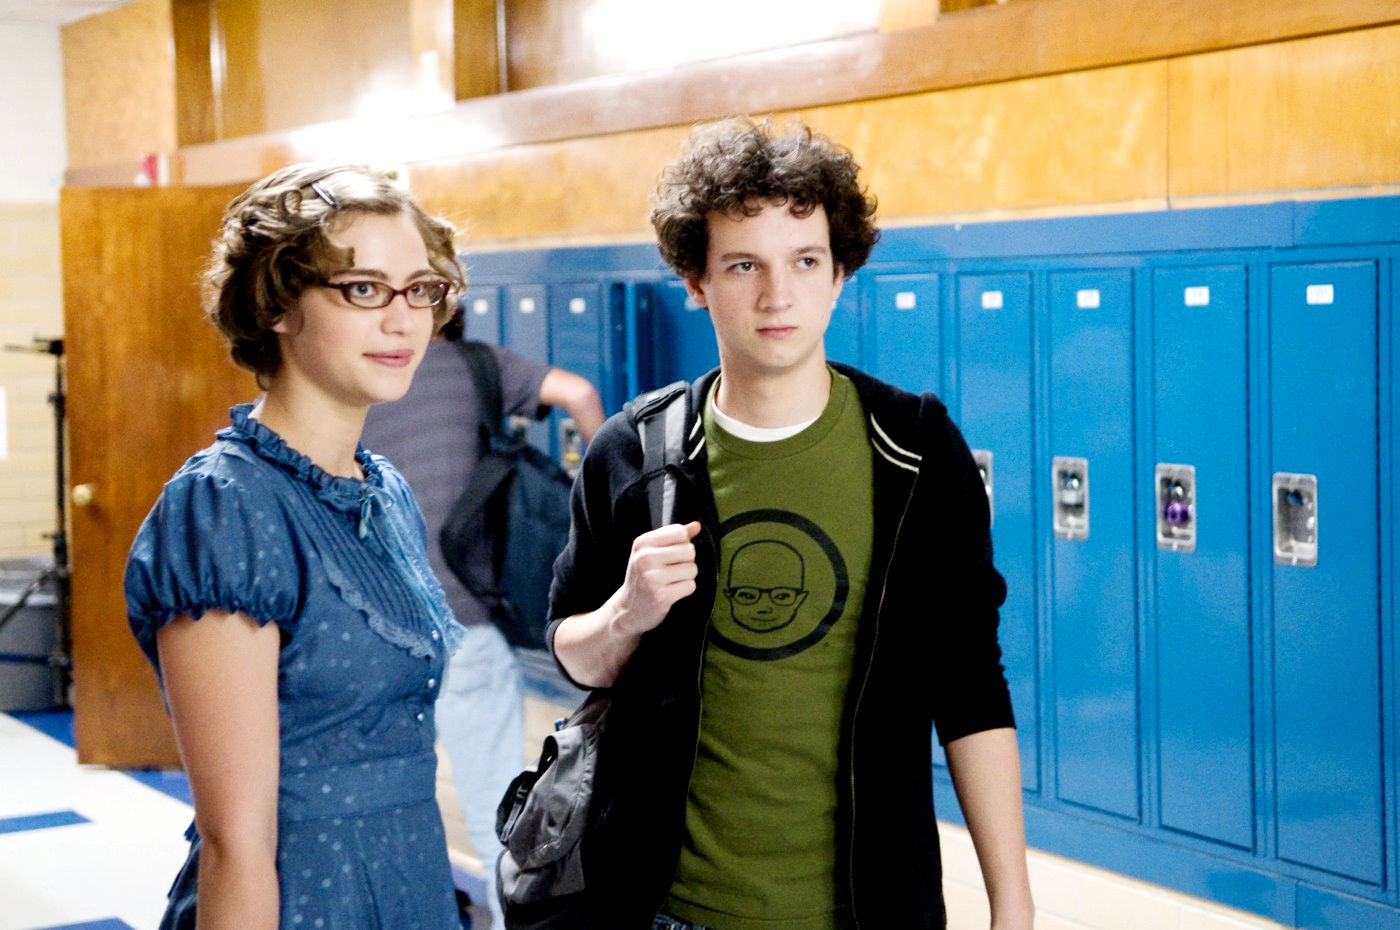 Elvy Yost stars as Irene Lerman (Cello) and Gaelan Connell stars as Will Burton in Summit Entertainment's Bandslam (2009)